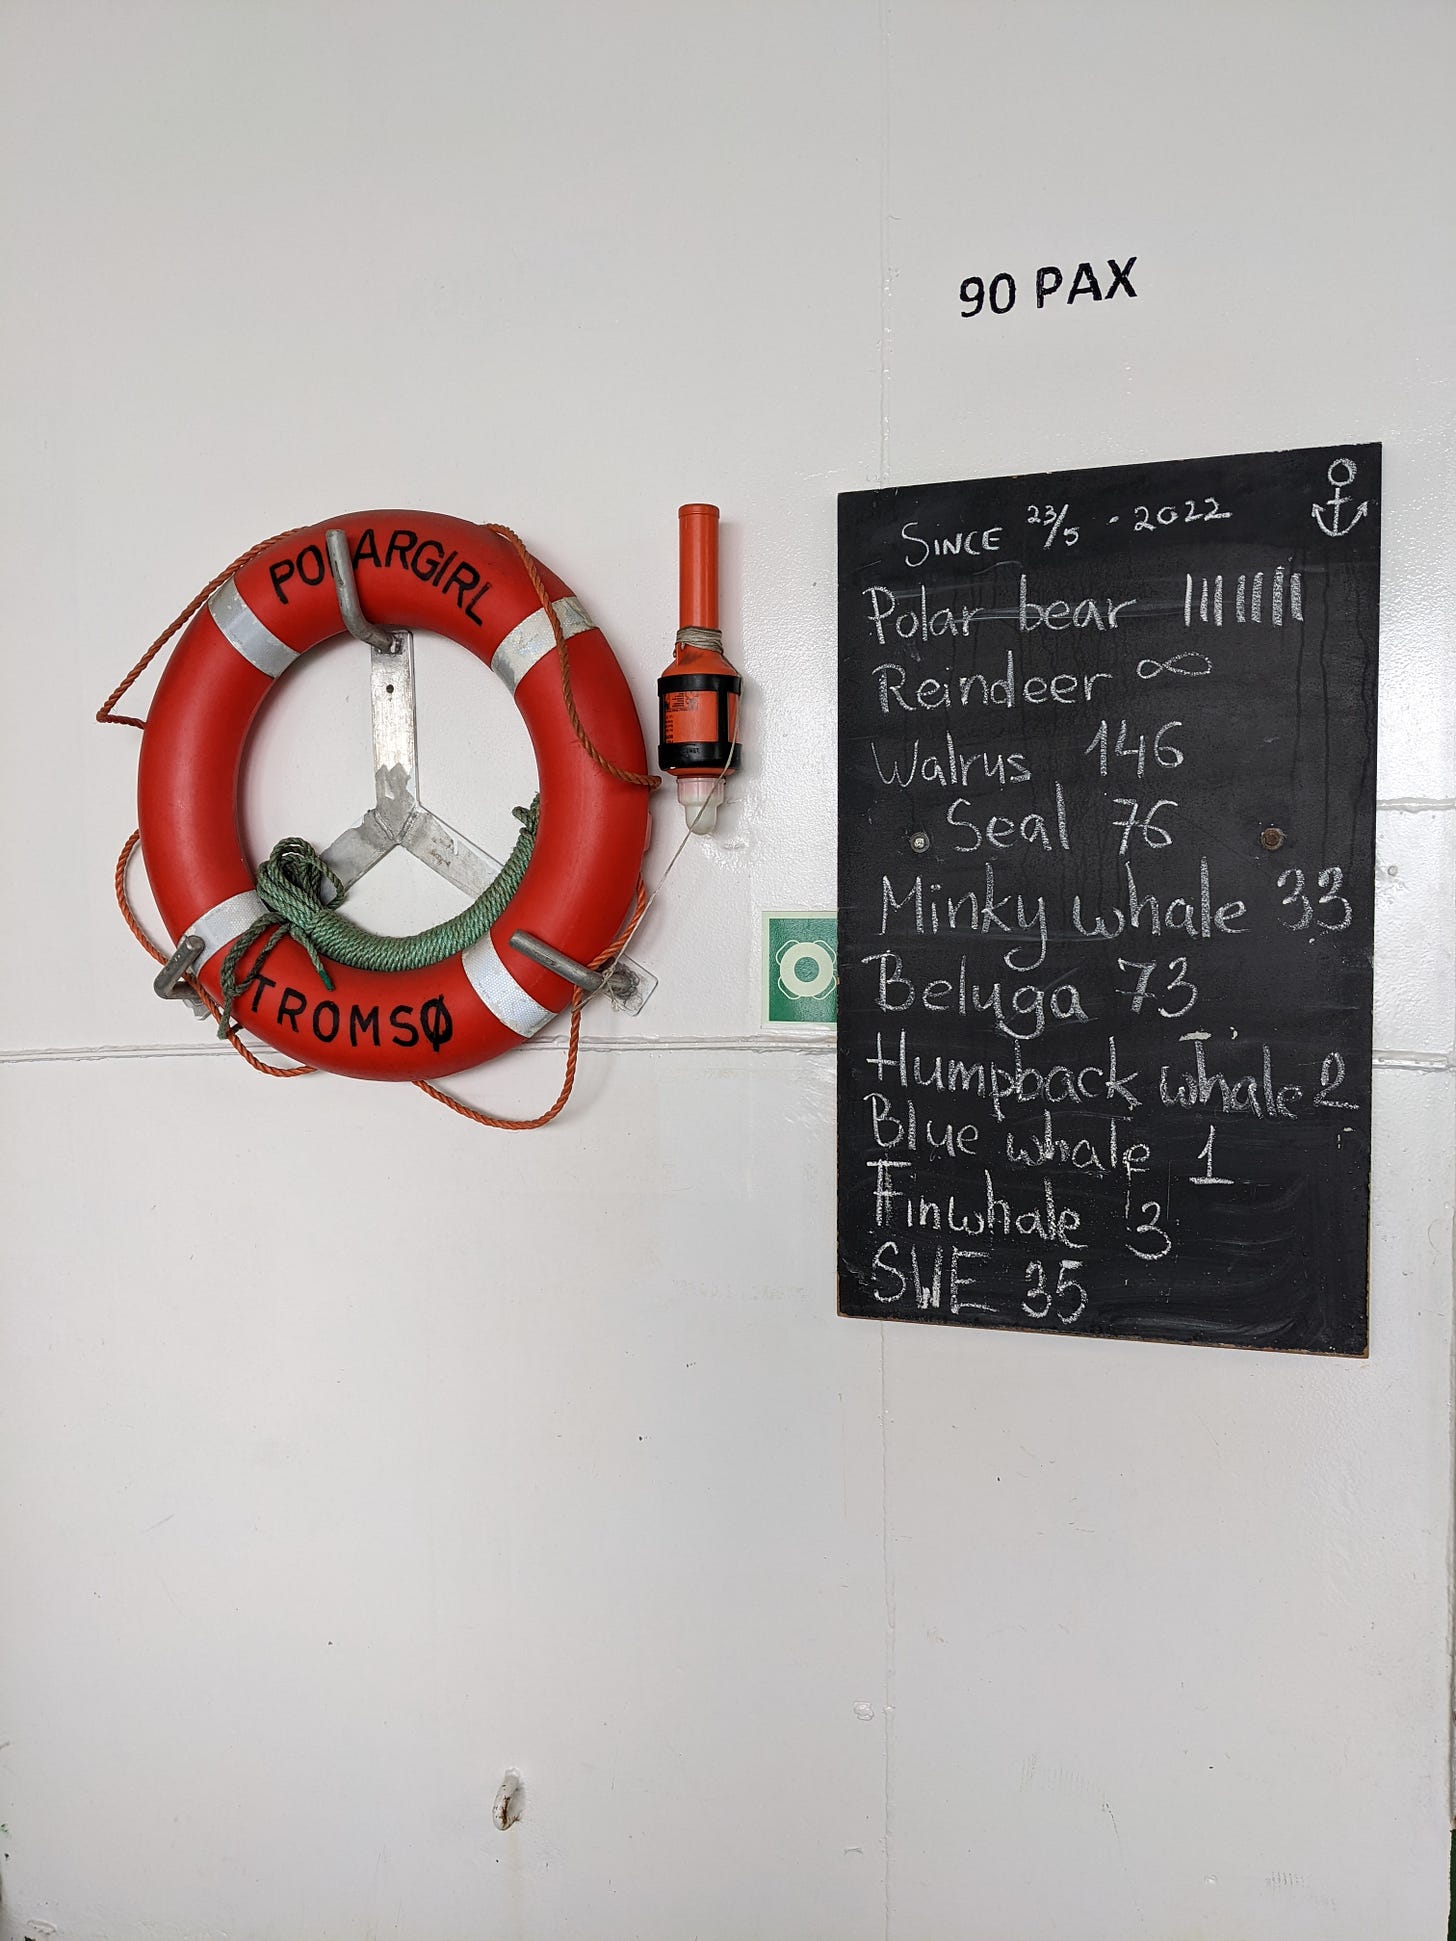 A lifebuoy and chalkboard on the ship Polargirl, the latter used to count wildlife sightings since 2022-05-23.